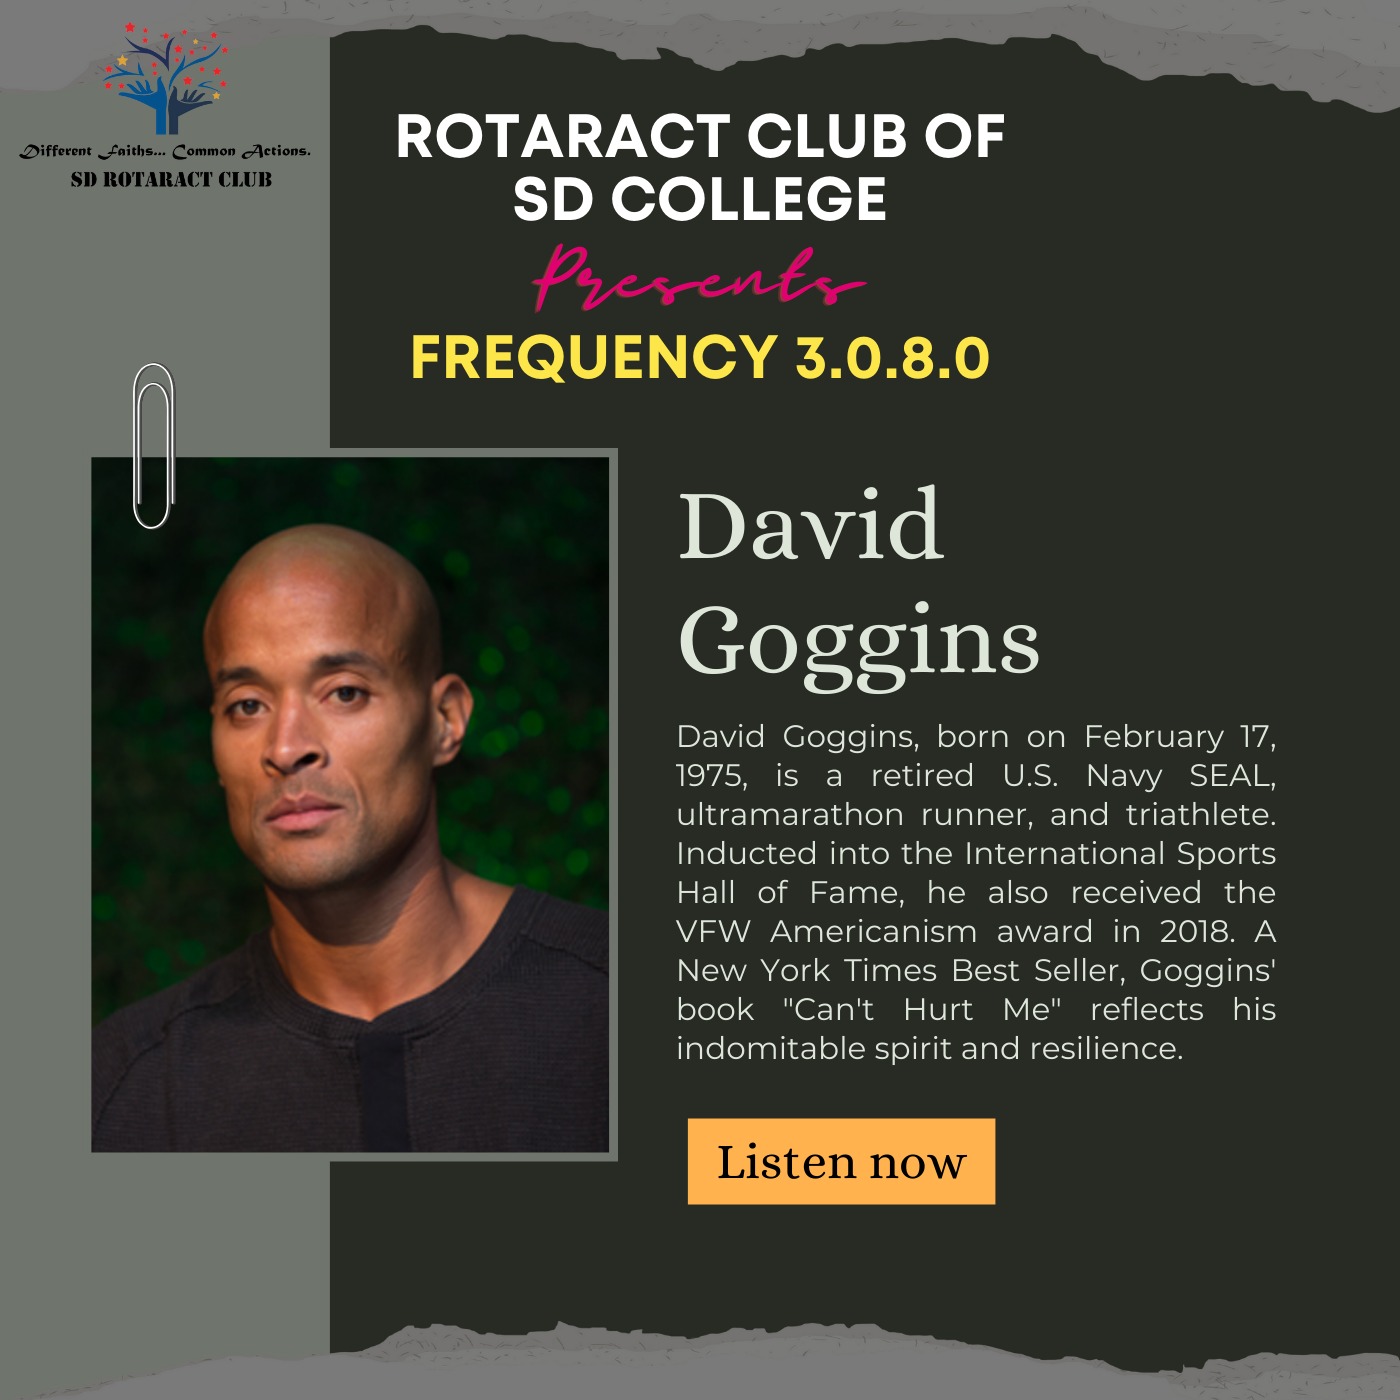 INSPIRATION FROM THE LIFE OF DAVID GOGGINS